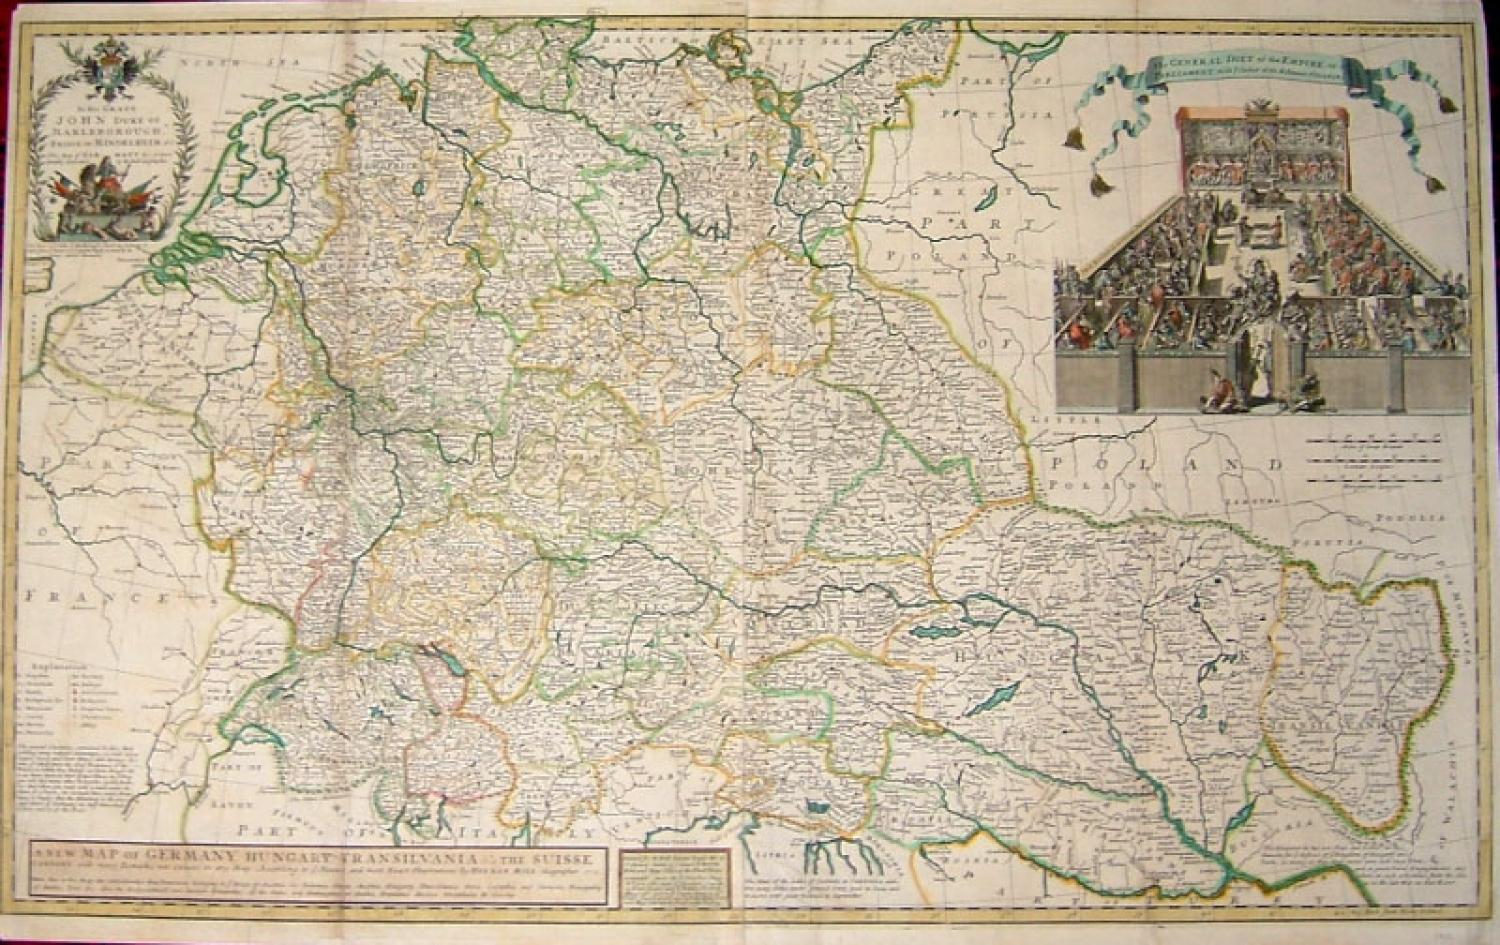 SOLD New Map of Germany, Hungary, Transilvania & The Suisse Cantons..